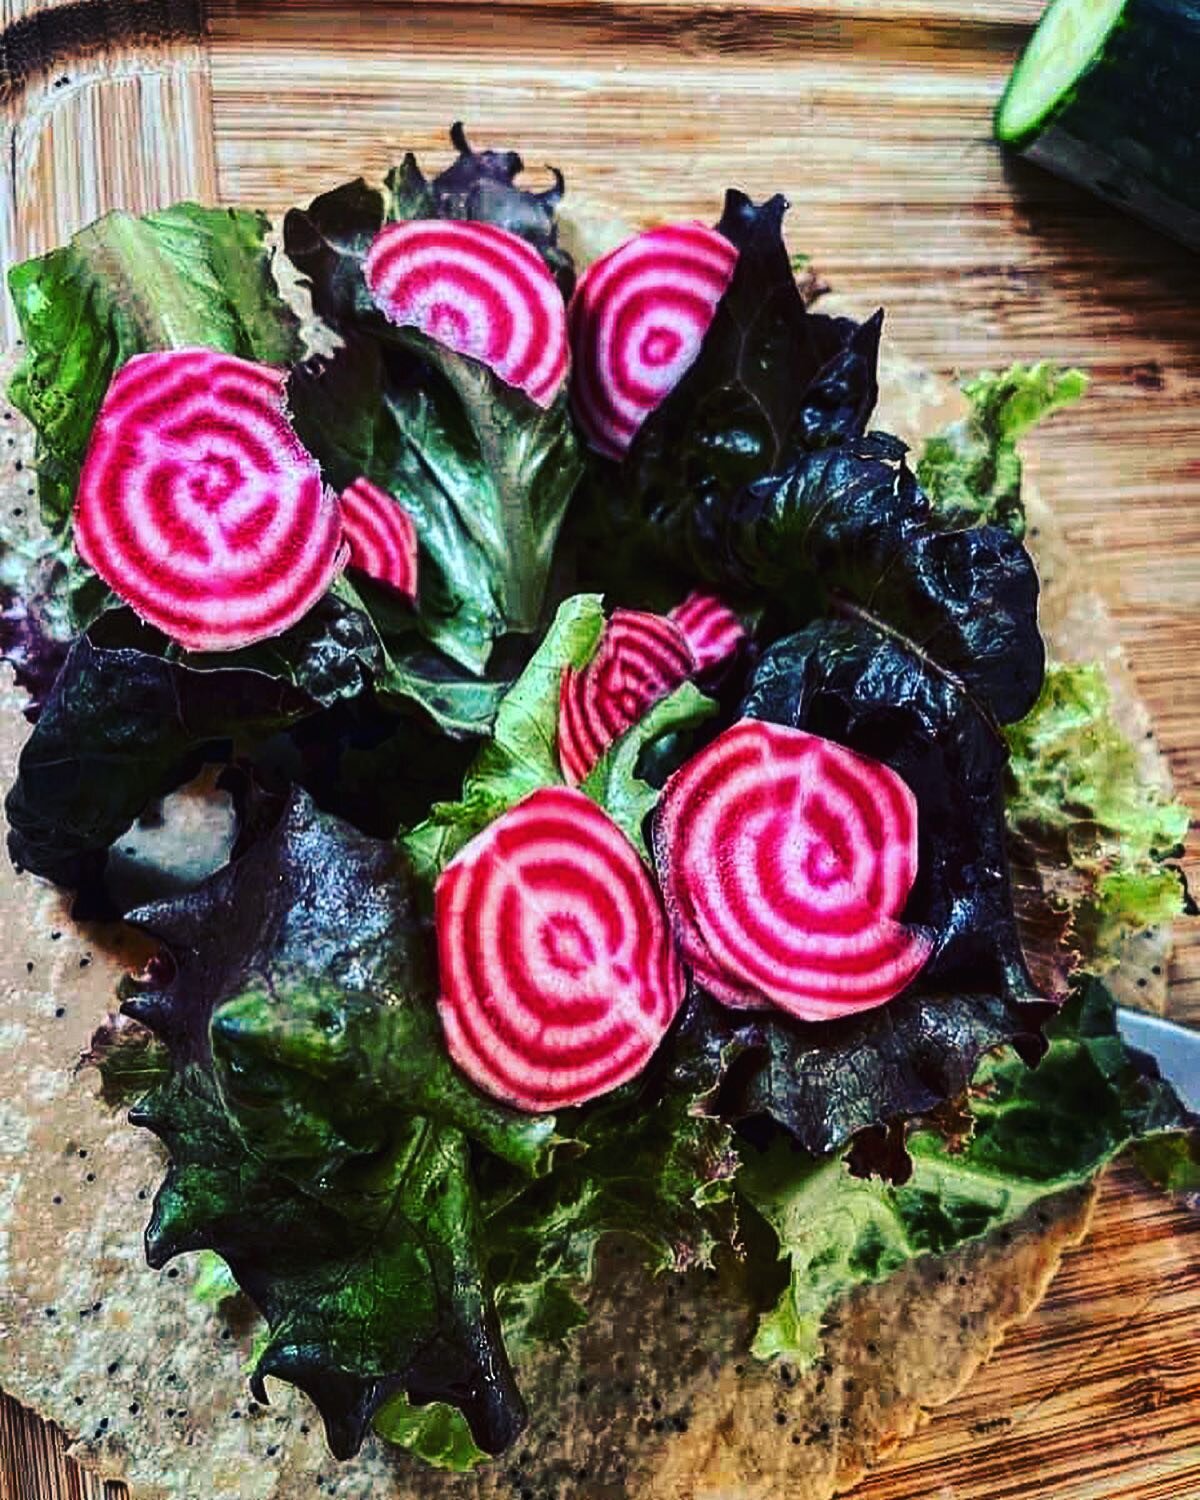 I love seeing what happens to veggies after they leave the market table! 

It&rsquo;s always lovely to see the kitchen creations that customers come up with.

In the first photo, a customer sliced fresh chioggia beets onto a bed of farm fresh salad m